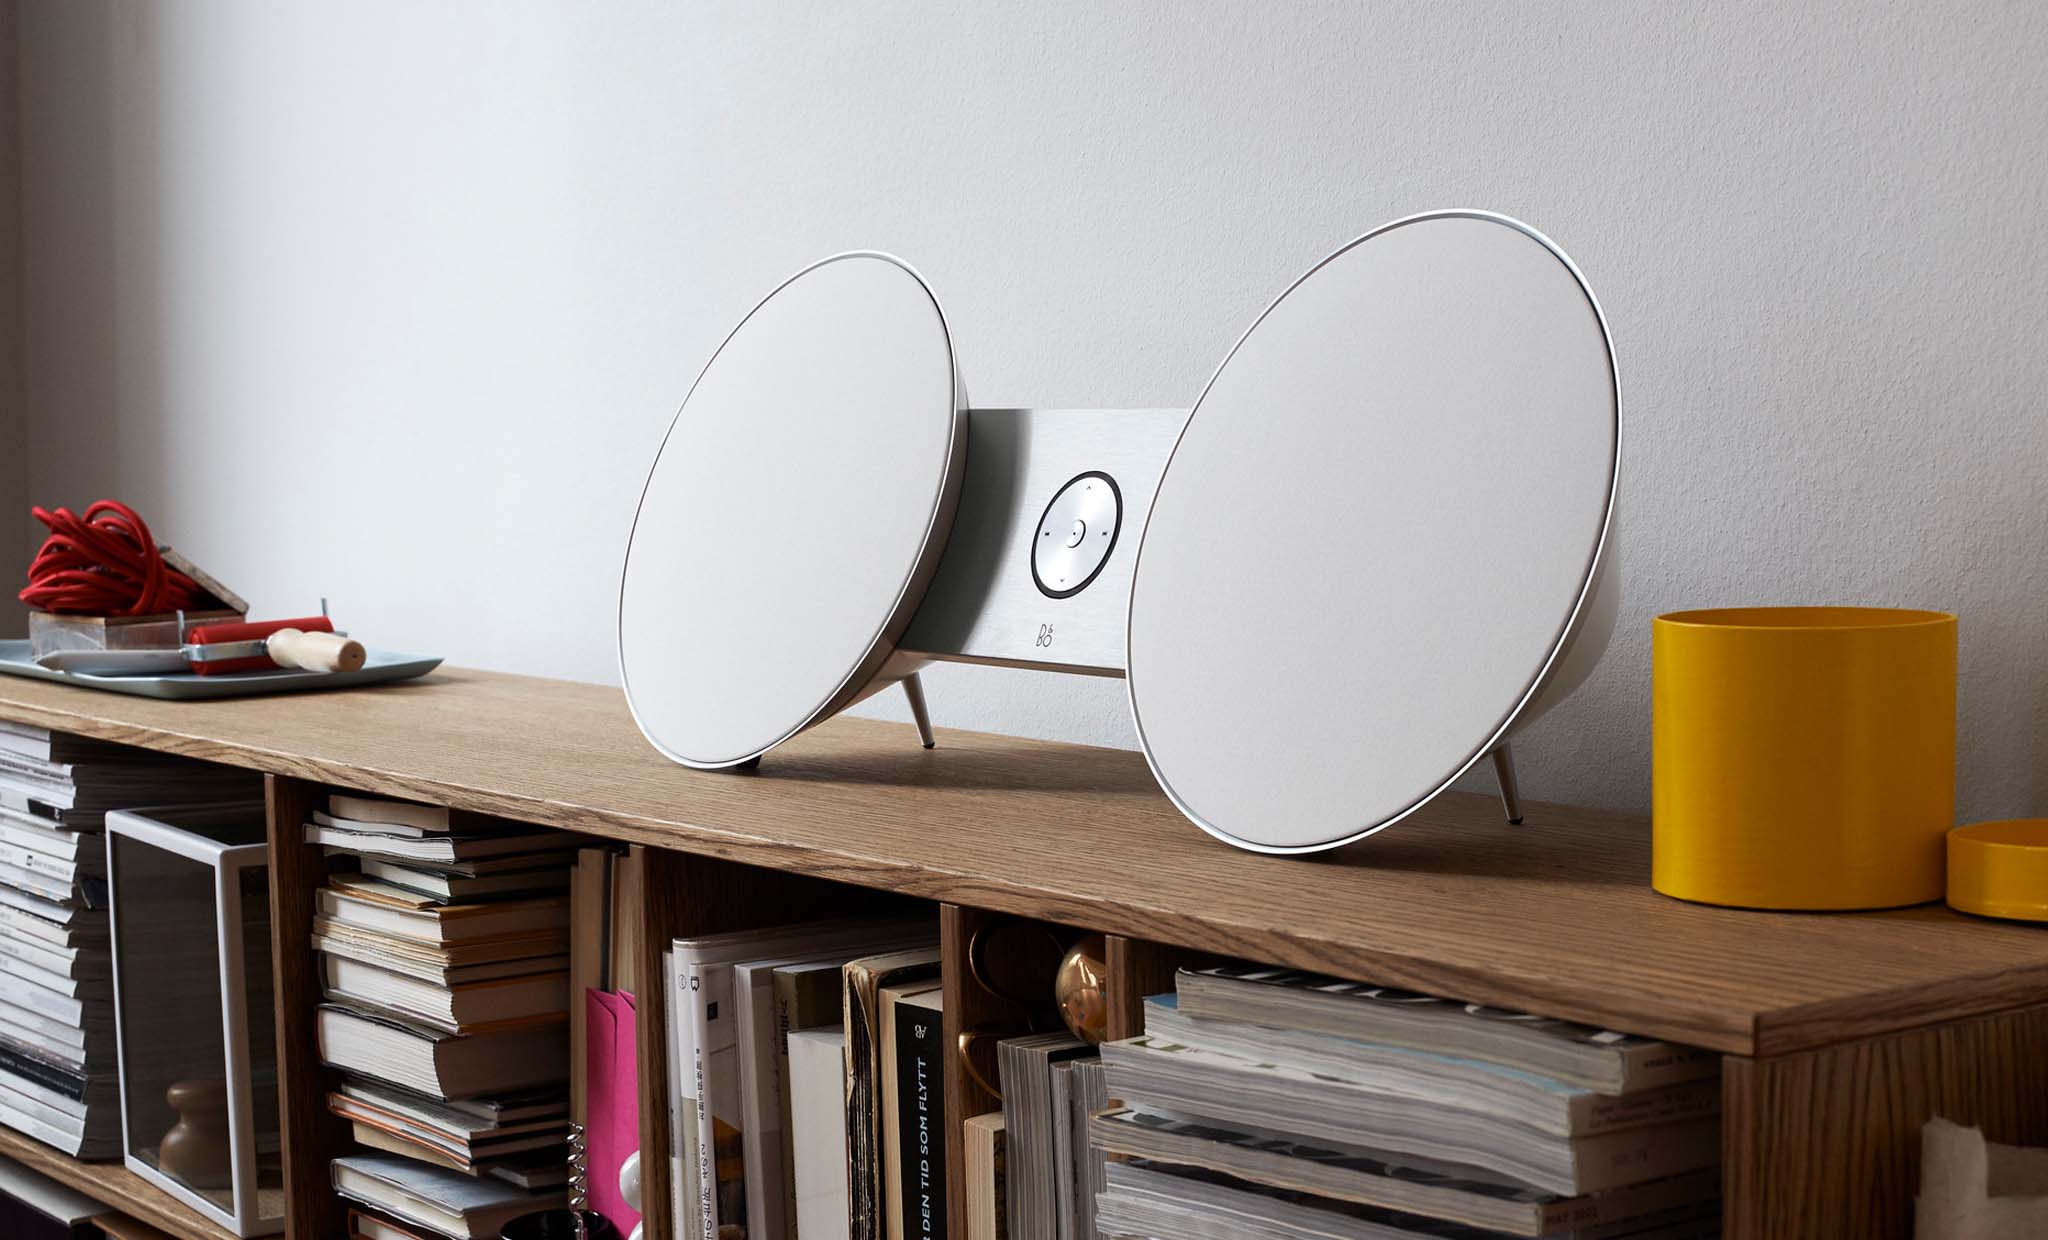 Beoplay A8